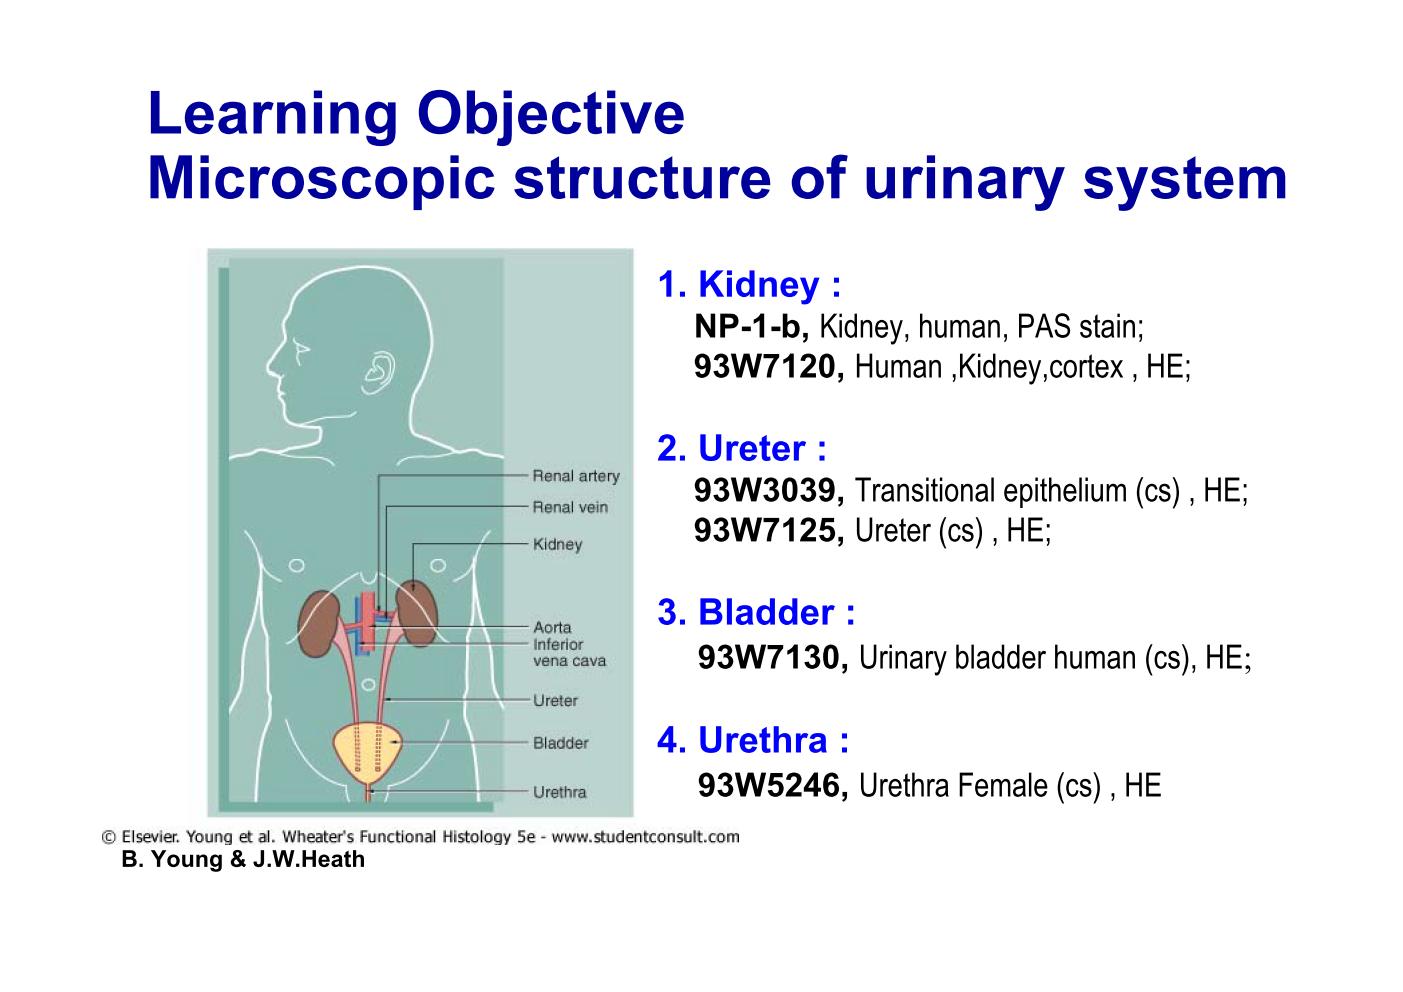 block8_03.jpg - Learning Objective  Microscopic structure of urinary system                       1. Kidney :                         NP-1-b, Kidney, human, PAS stain;                         93W7120, Human ,Kidney,cortex , HE;                       2. Ureter :                         93W3039, Transitional epithelium (cs) , HE;                         93W7125, Ureter (cs) , HE;                       3. Bladder :                         93W7130, Urinary bladder human (cs), HE;                       4. Urethra :                         93W5246, Urethra Female (cs) , HE